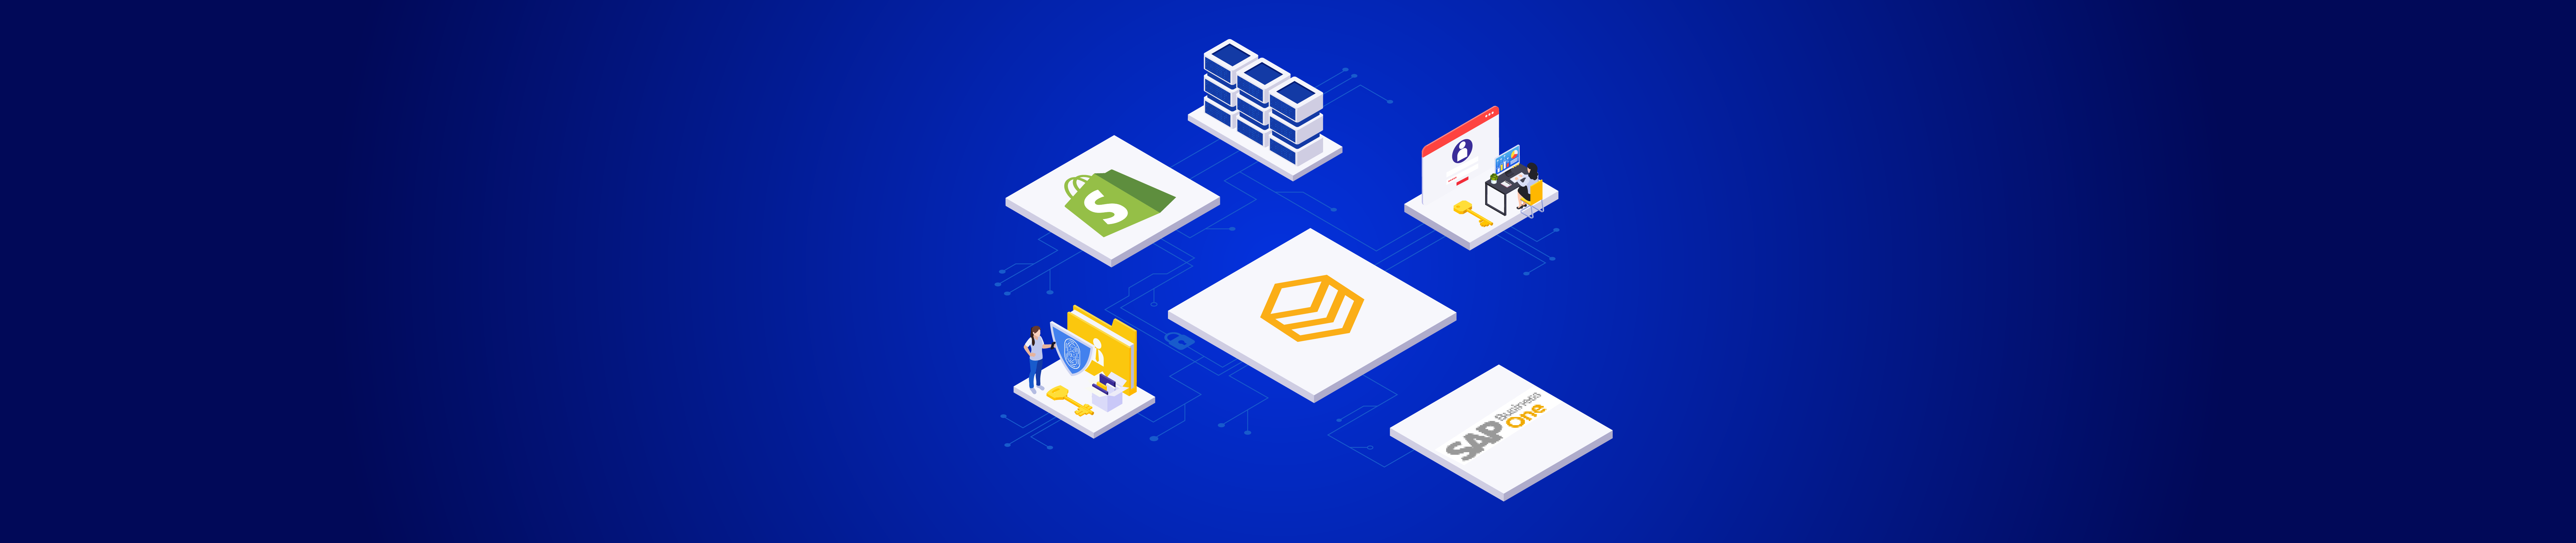 how to connect shopify and sap b1